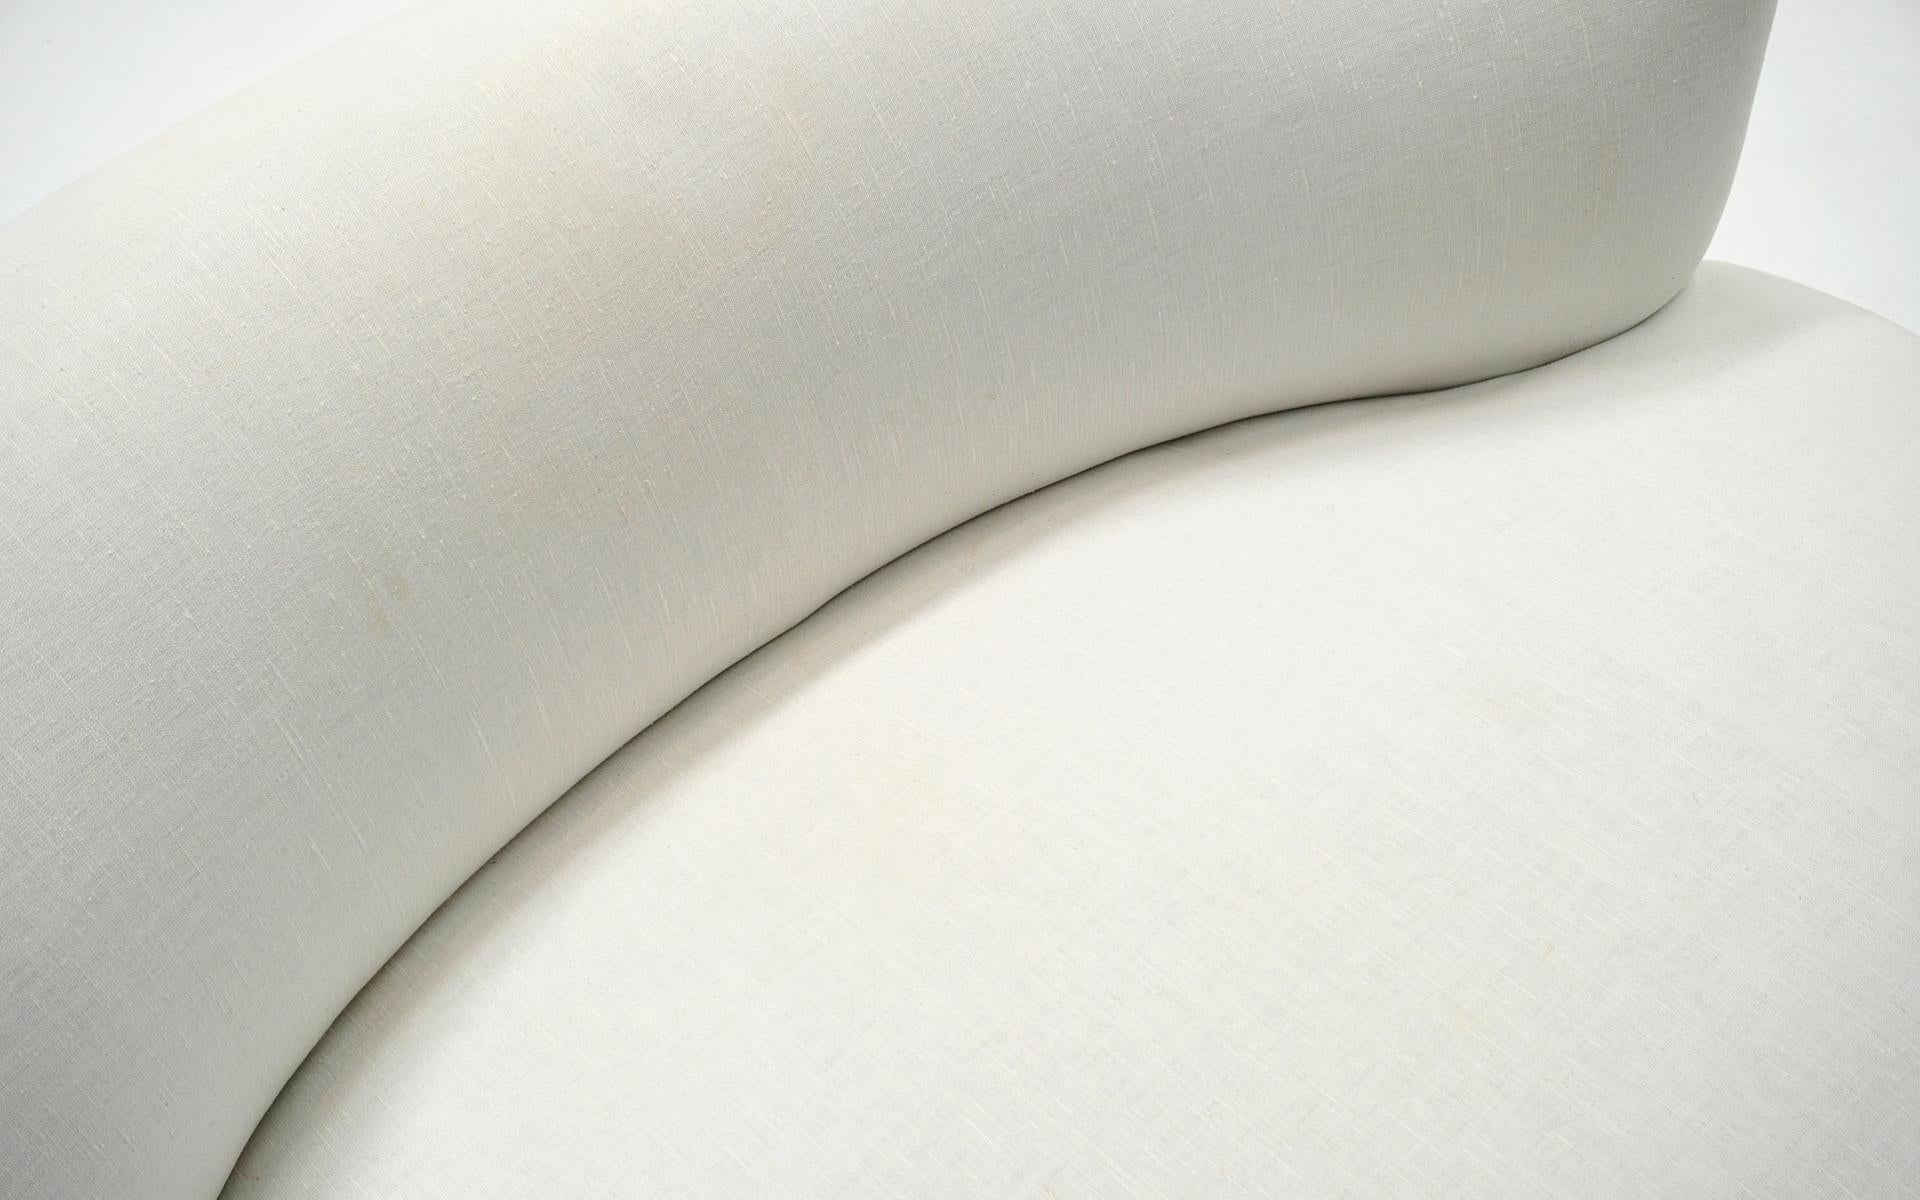 Late 20th Century White Cloud Shaped Love Seat / Settee / 1980s, Priced for Reupholstery